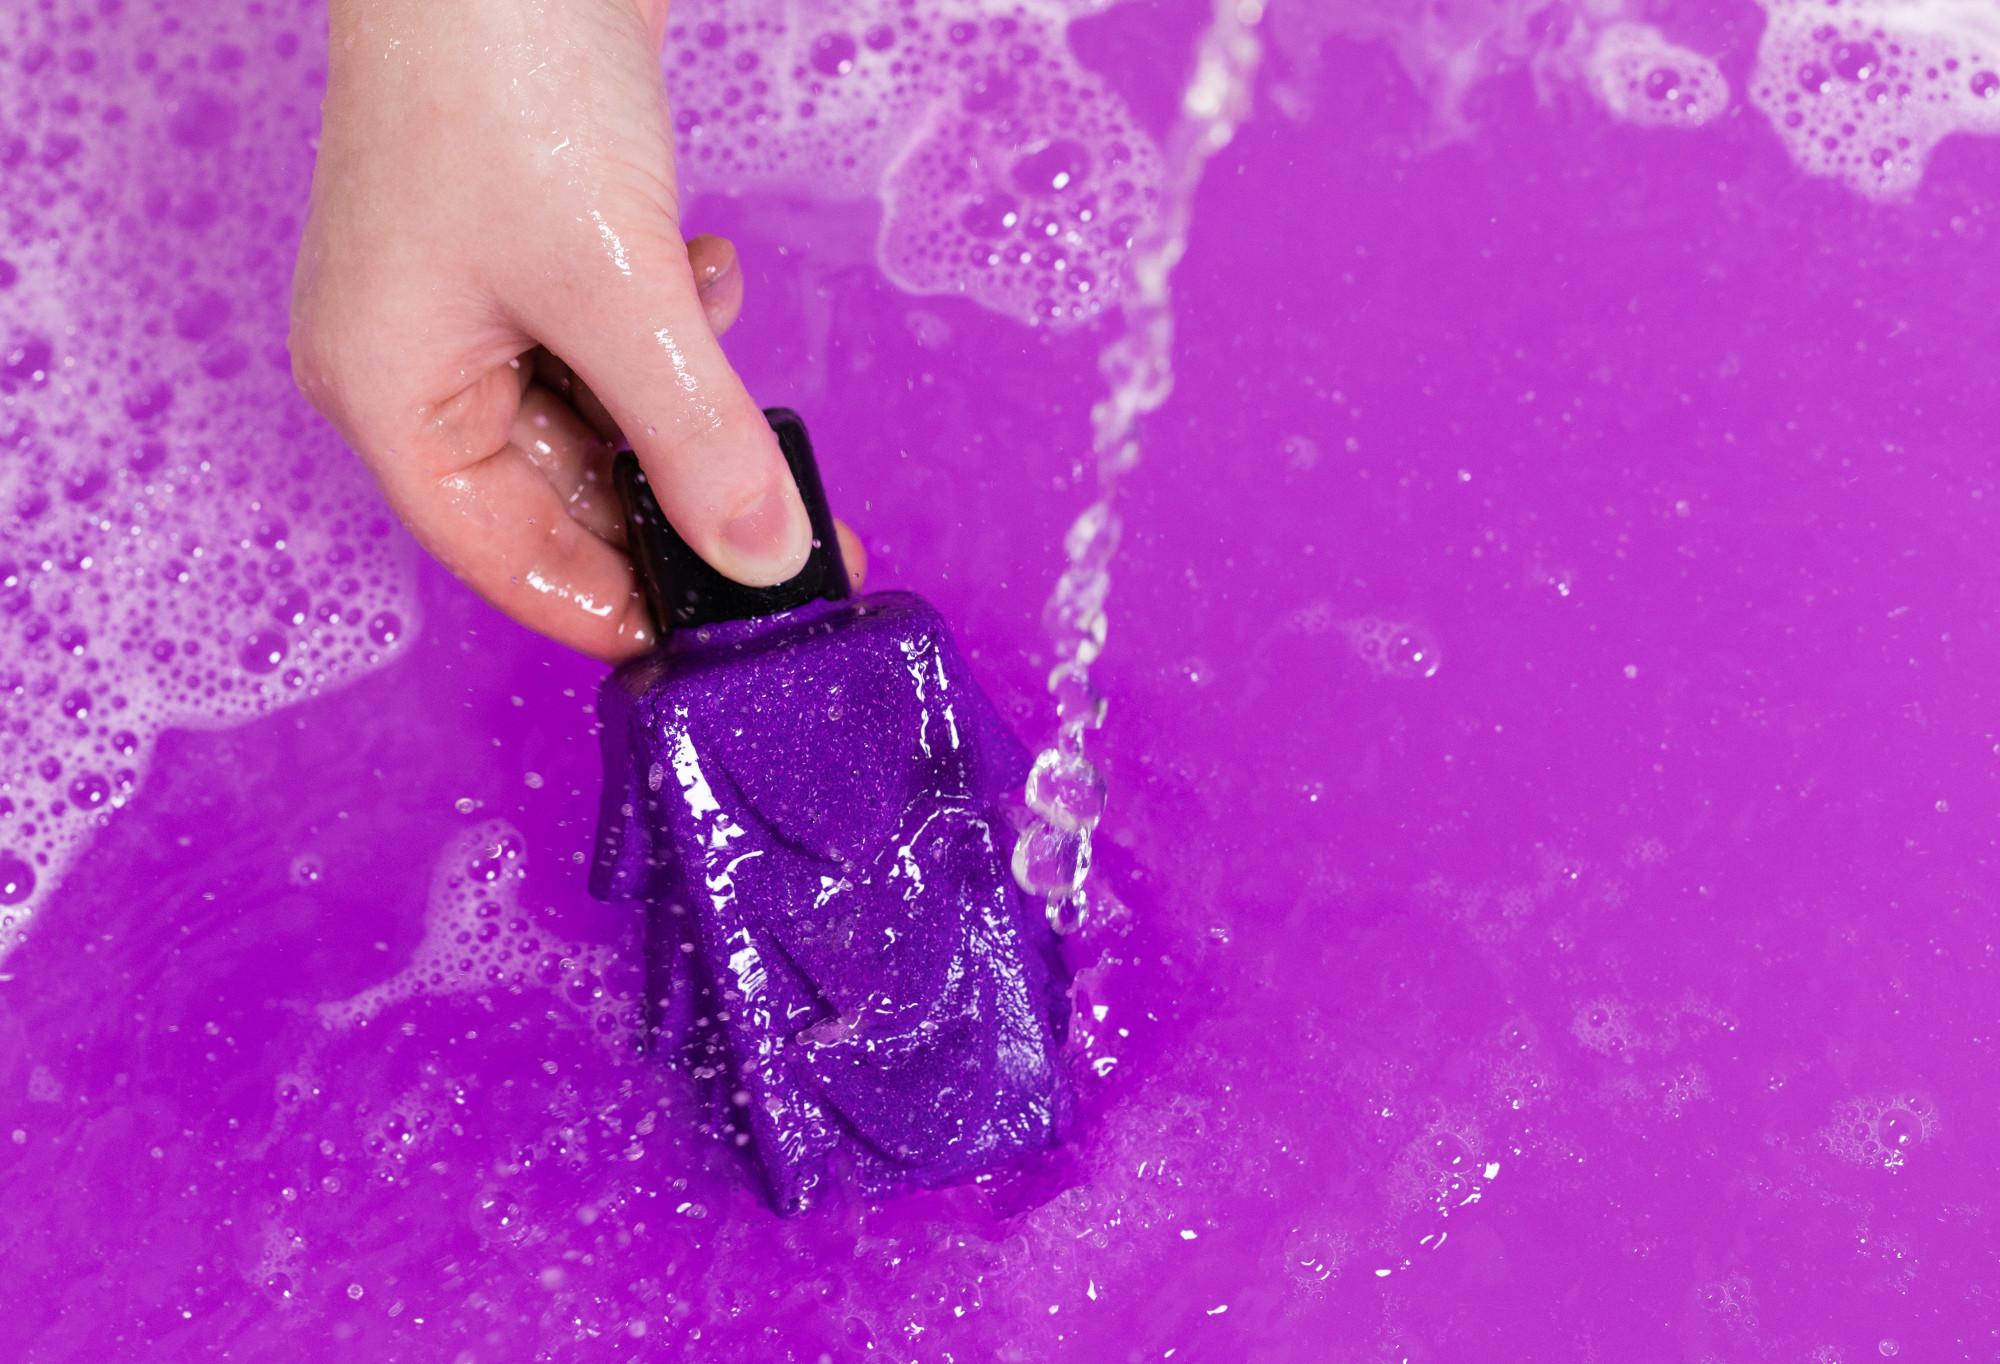 Purple Cocktail is being held by its black wax 'lid' under a gentle stream of water, and in bright purple water, adding bubbles.